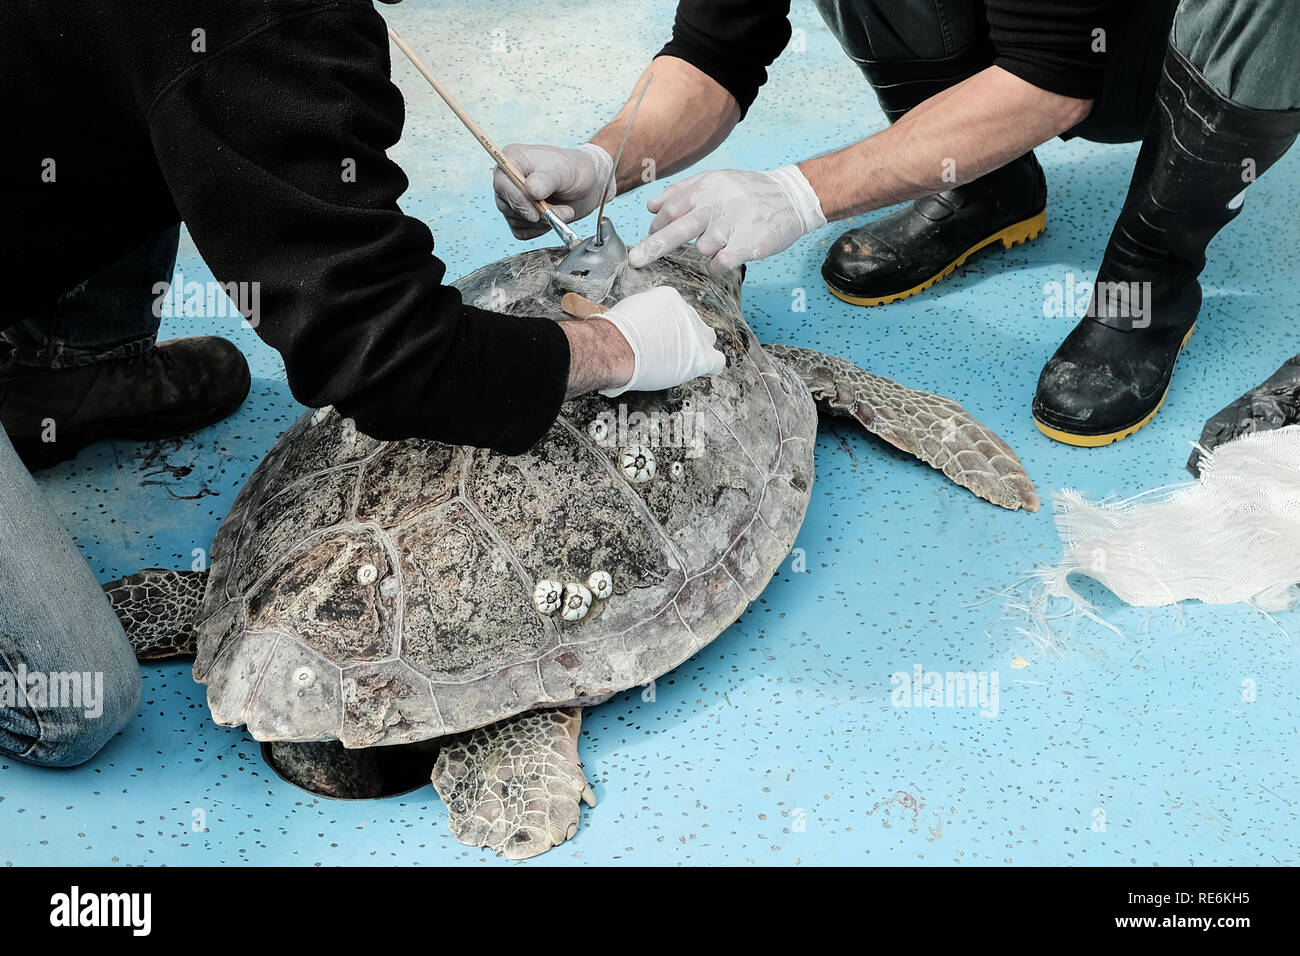 Mikhmoret, Israel. 20th January, 2019. Biologist YANIV LEVY (L), PhD, Israel Sea Turtle Rescue Center Manager, attaches a satellite tracking device to 'Nitzan', a loggerhead sea turtle, preparing it for release. The National Sea Turtle Rescue Center of the Israel Nature and Parks Authority is currently treating 46 injured sea turtles washed up on the Mediterranean shores nationwide. Approximately half of these patients are new arrivals from the last couple of stormy weeks characterized by soft tissue trauma (lungs, inner ear, abdomen, etc. Credit: Nir Alon/Alamy Live News Stock Photo